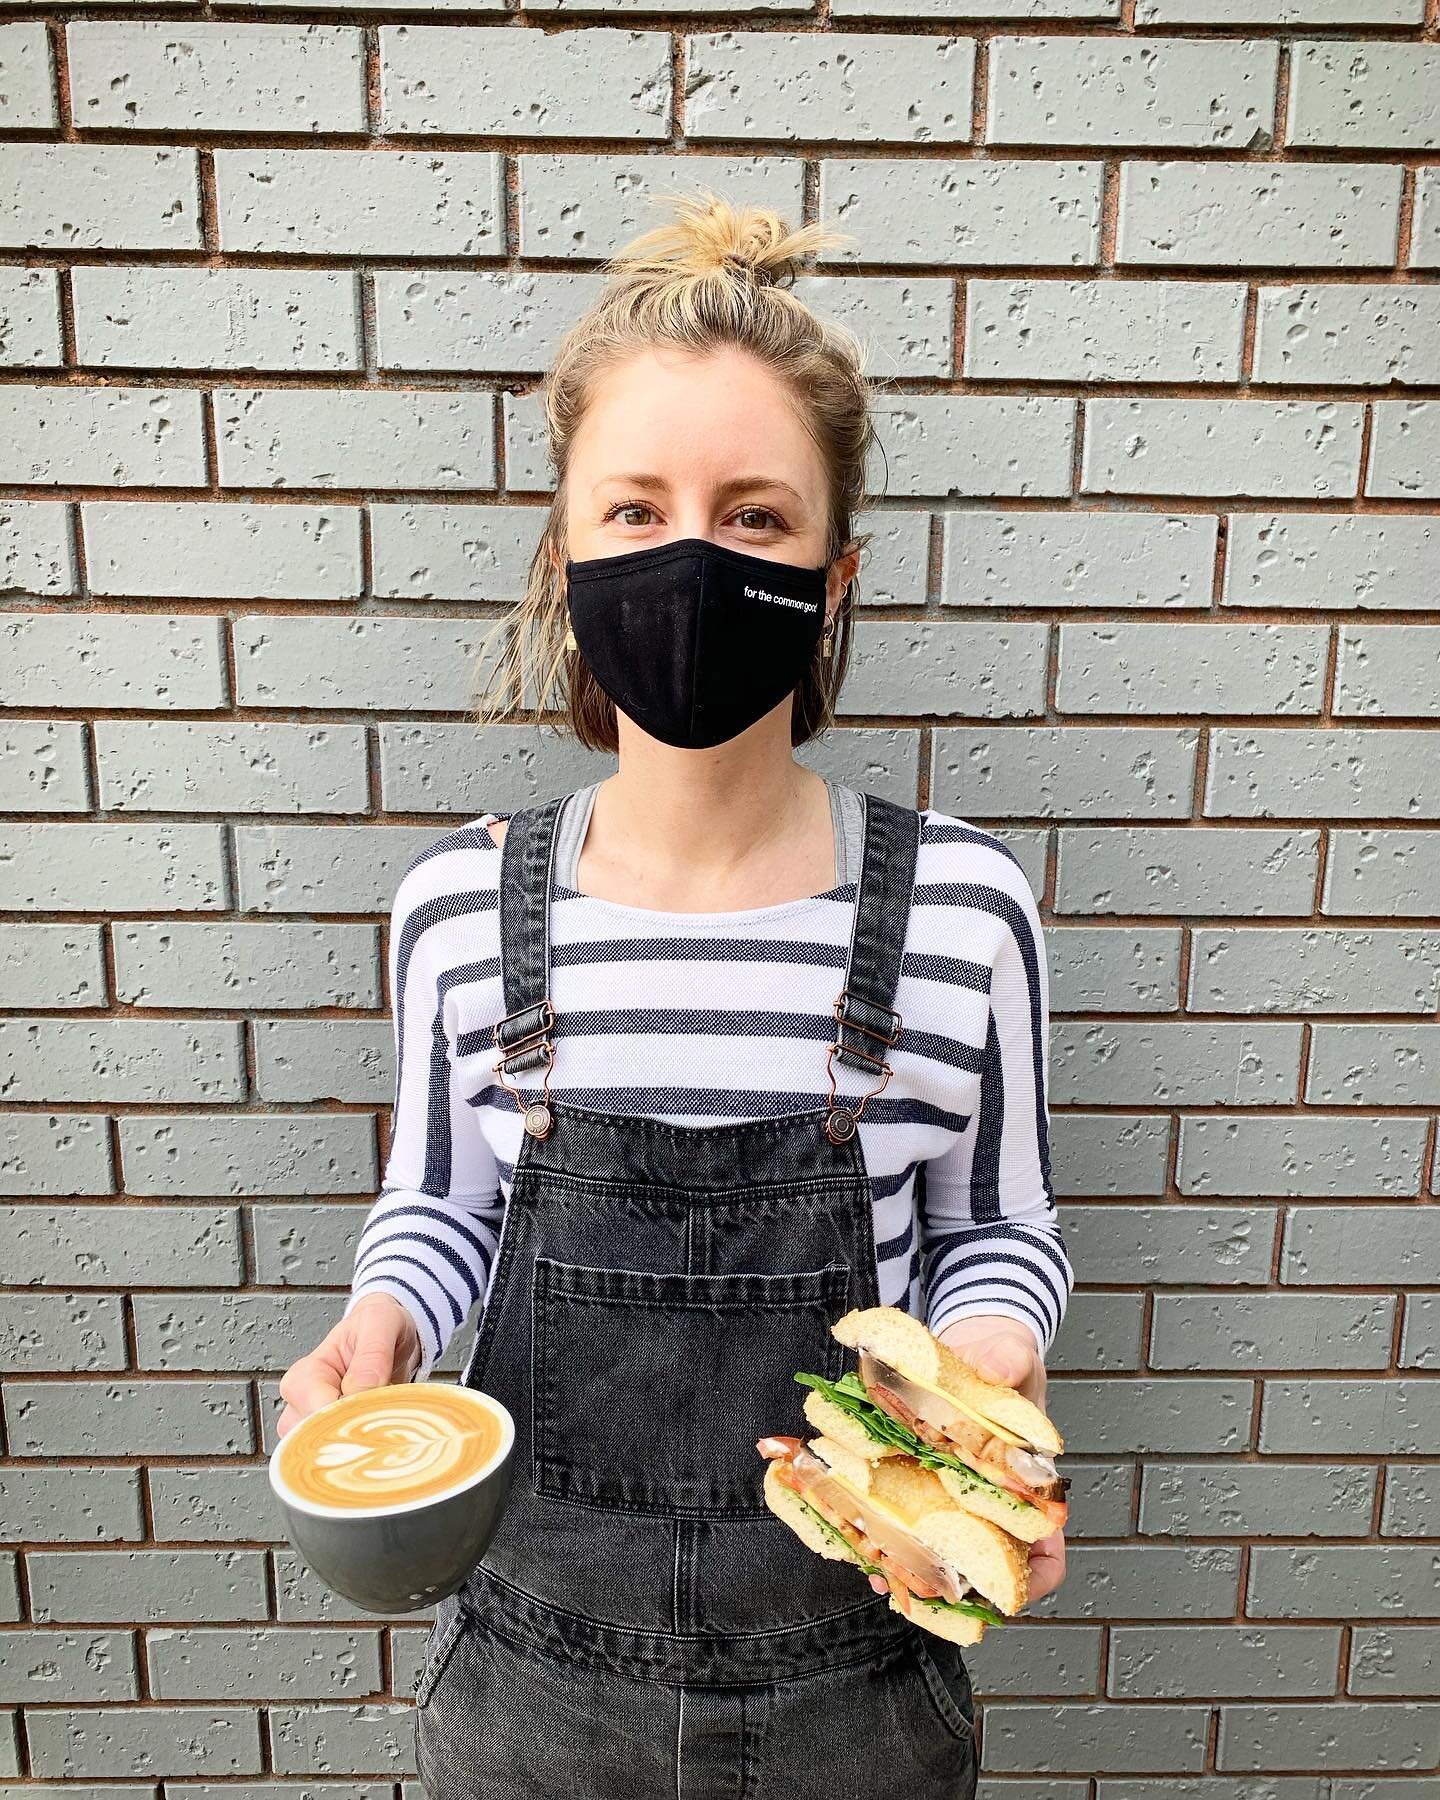 ISO Cafe Stories Part 7
Meet Jacinta 👱🏻&zwj;♀️
Jacinta has been with us since before day 1 opening @littlethingscoffee for @worldvision. 
Words from Grant...
She is the master behind everything that makes LTC amazing! Everything you love to eat, to